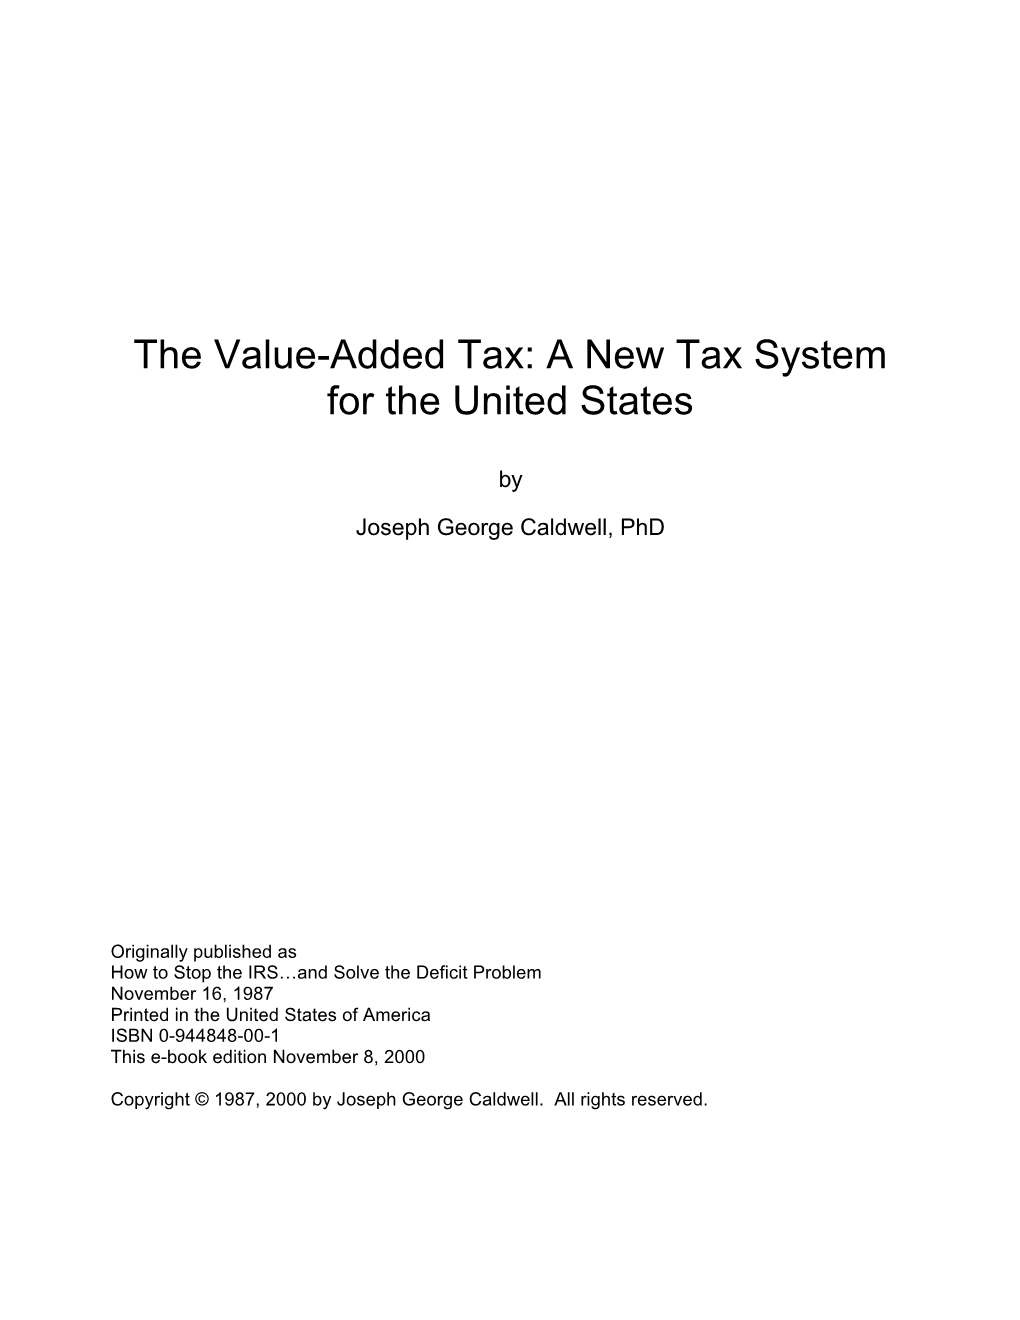 The Value-Added Tax: a New Tax System for the United States